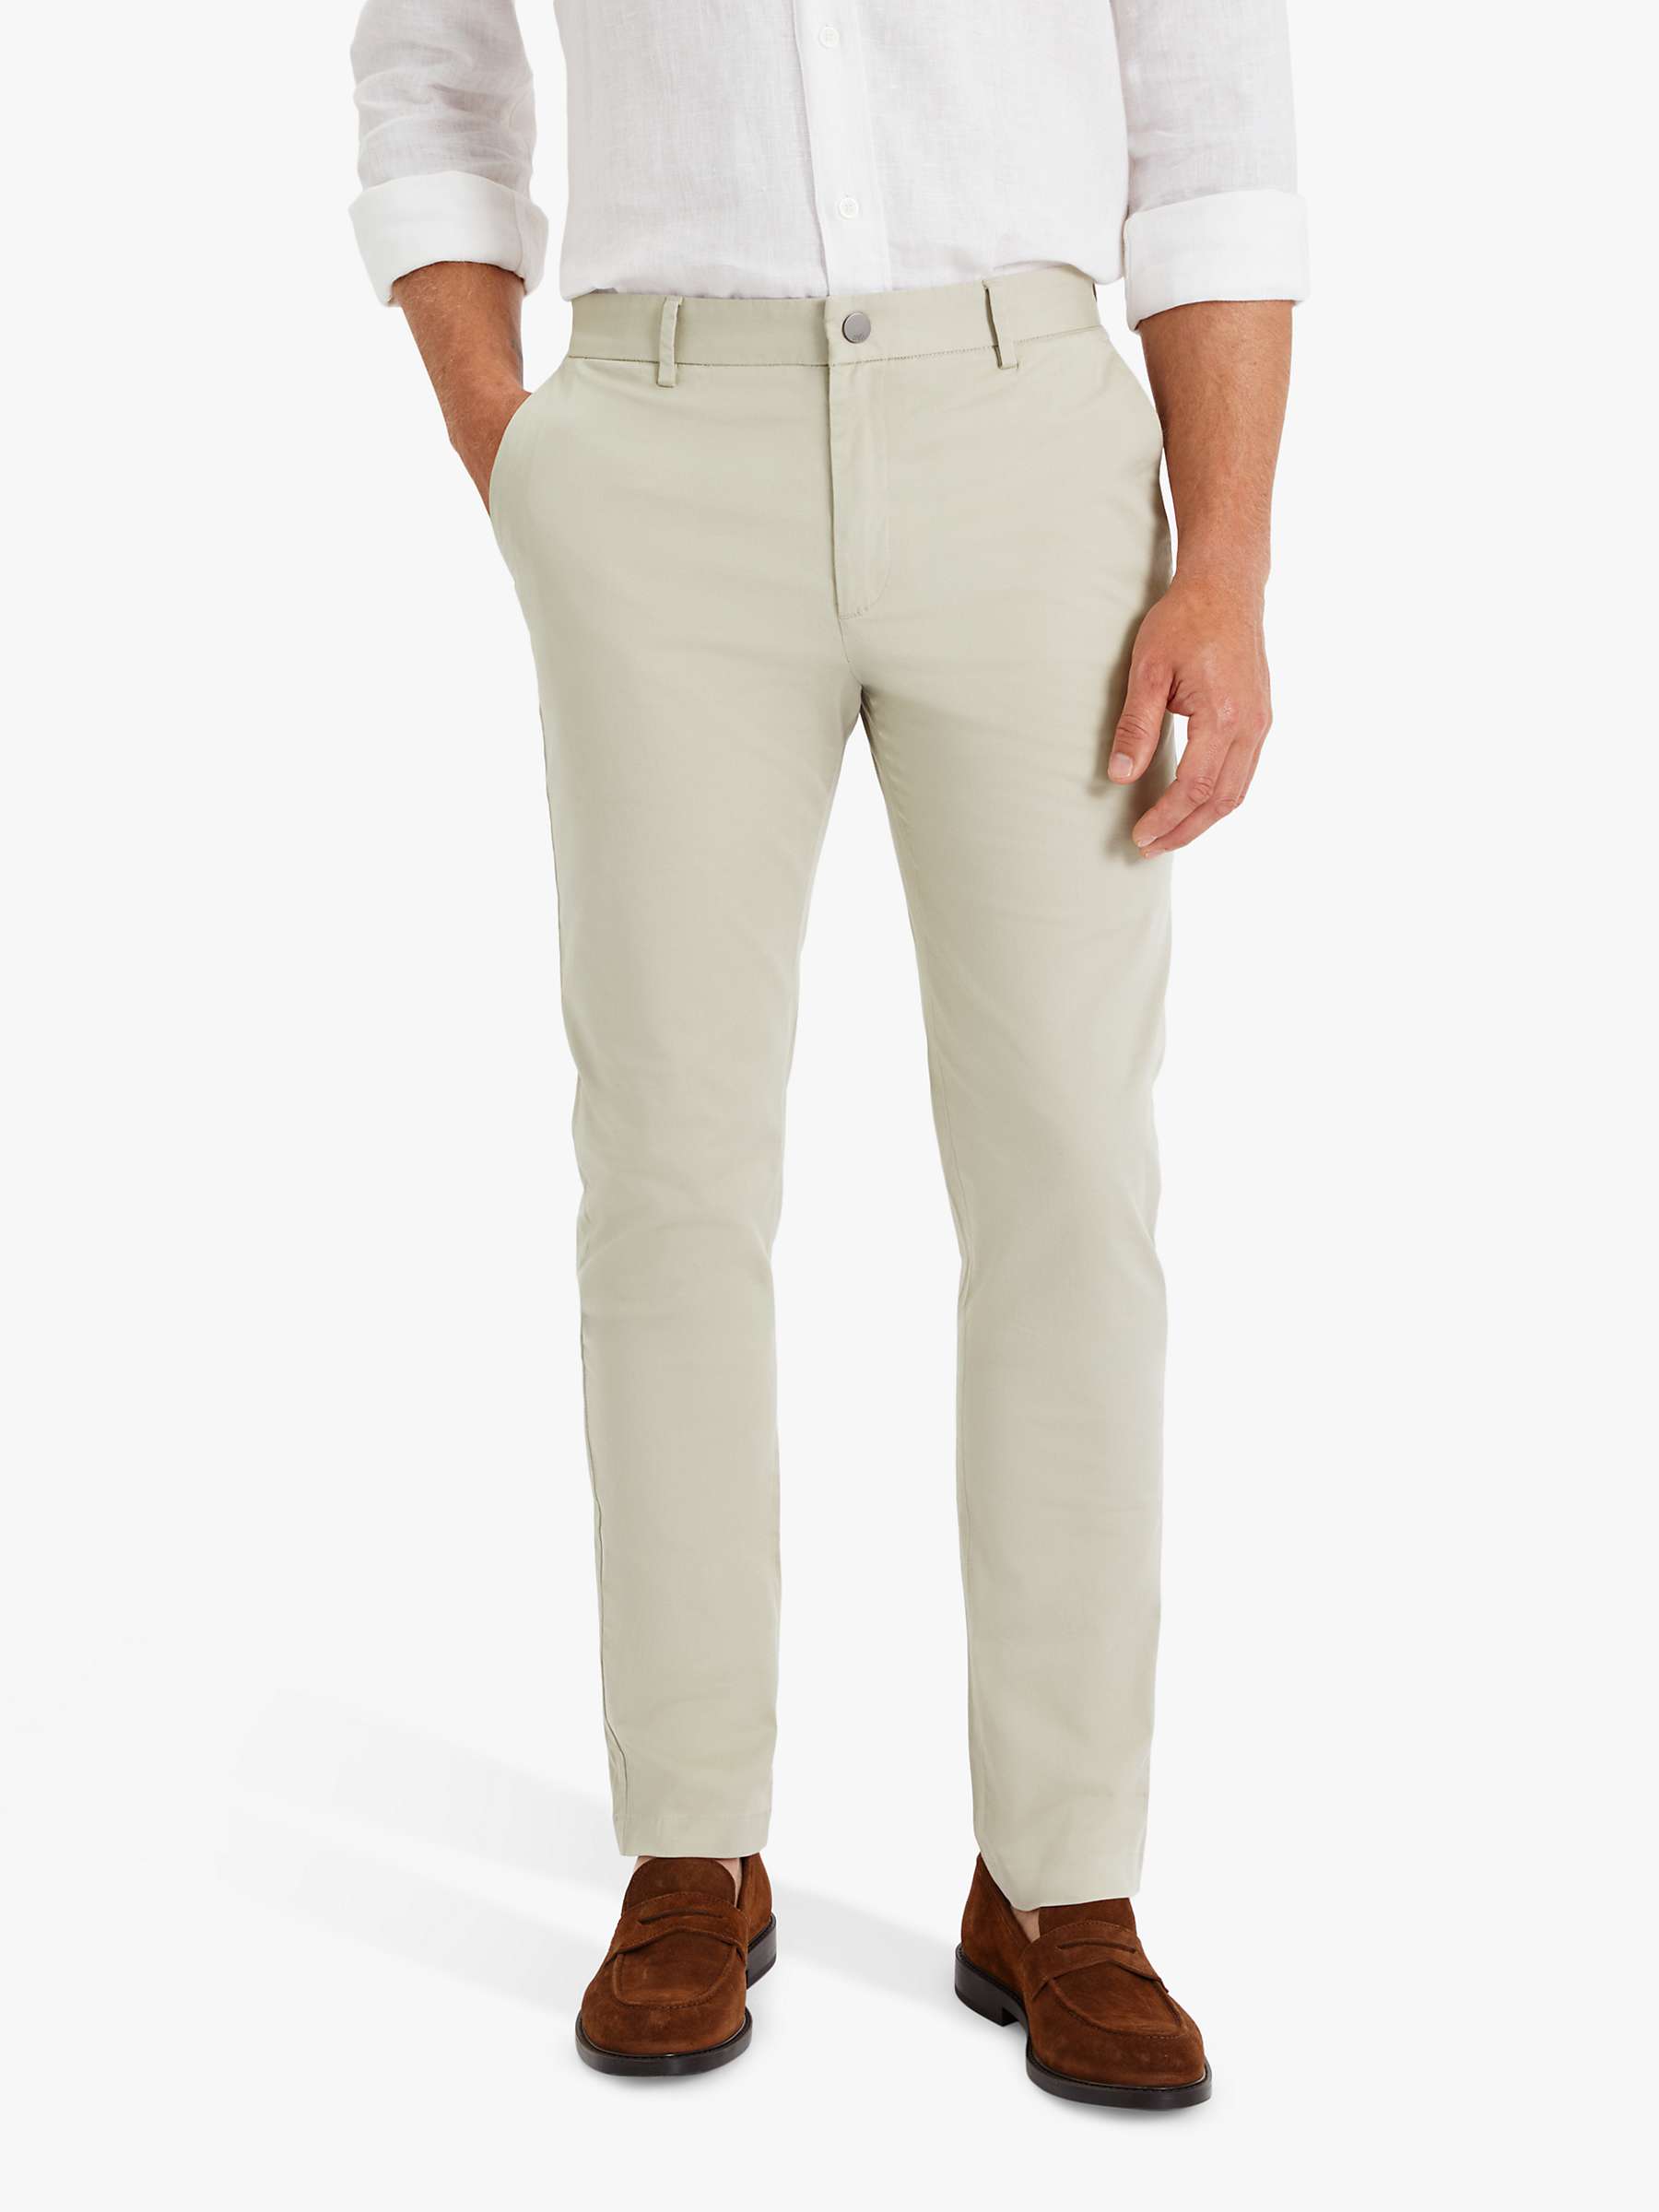 Buy SPOKE Lightweights Cotton Blend Narrow Thigh Trousers Online at johnlewis.com